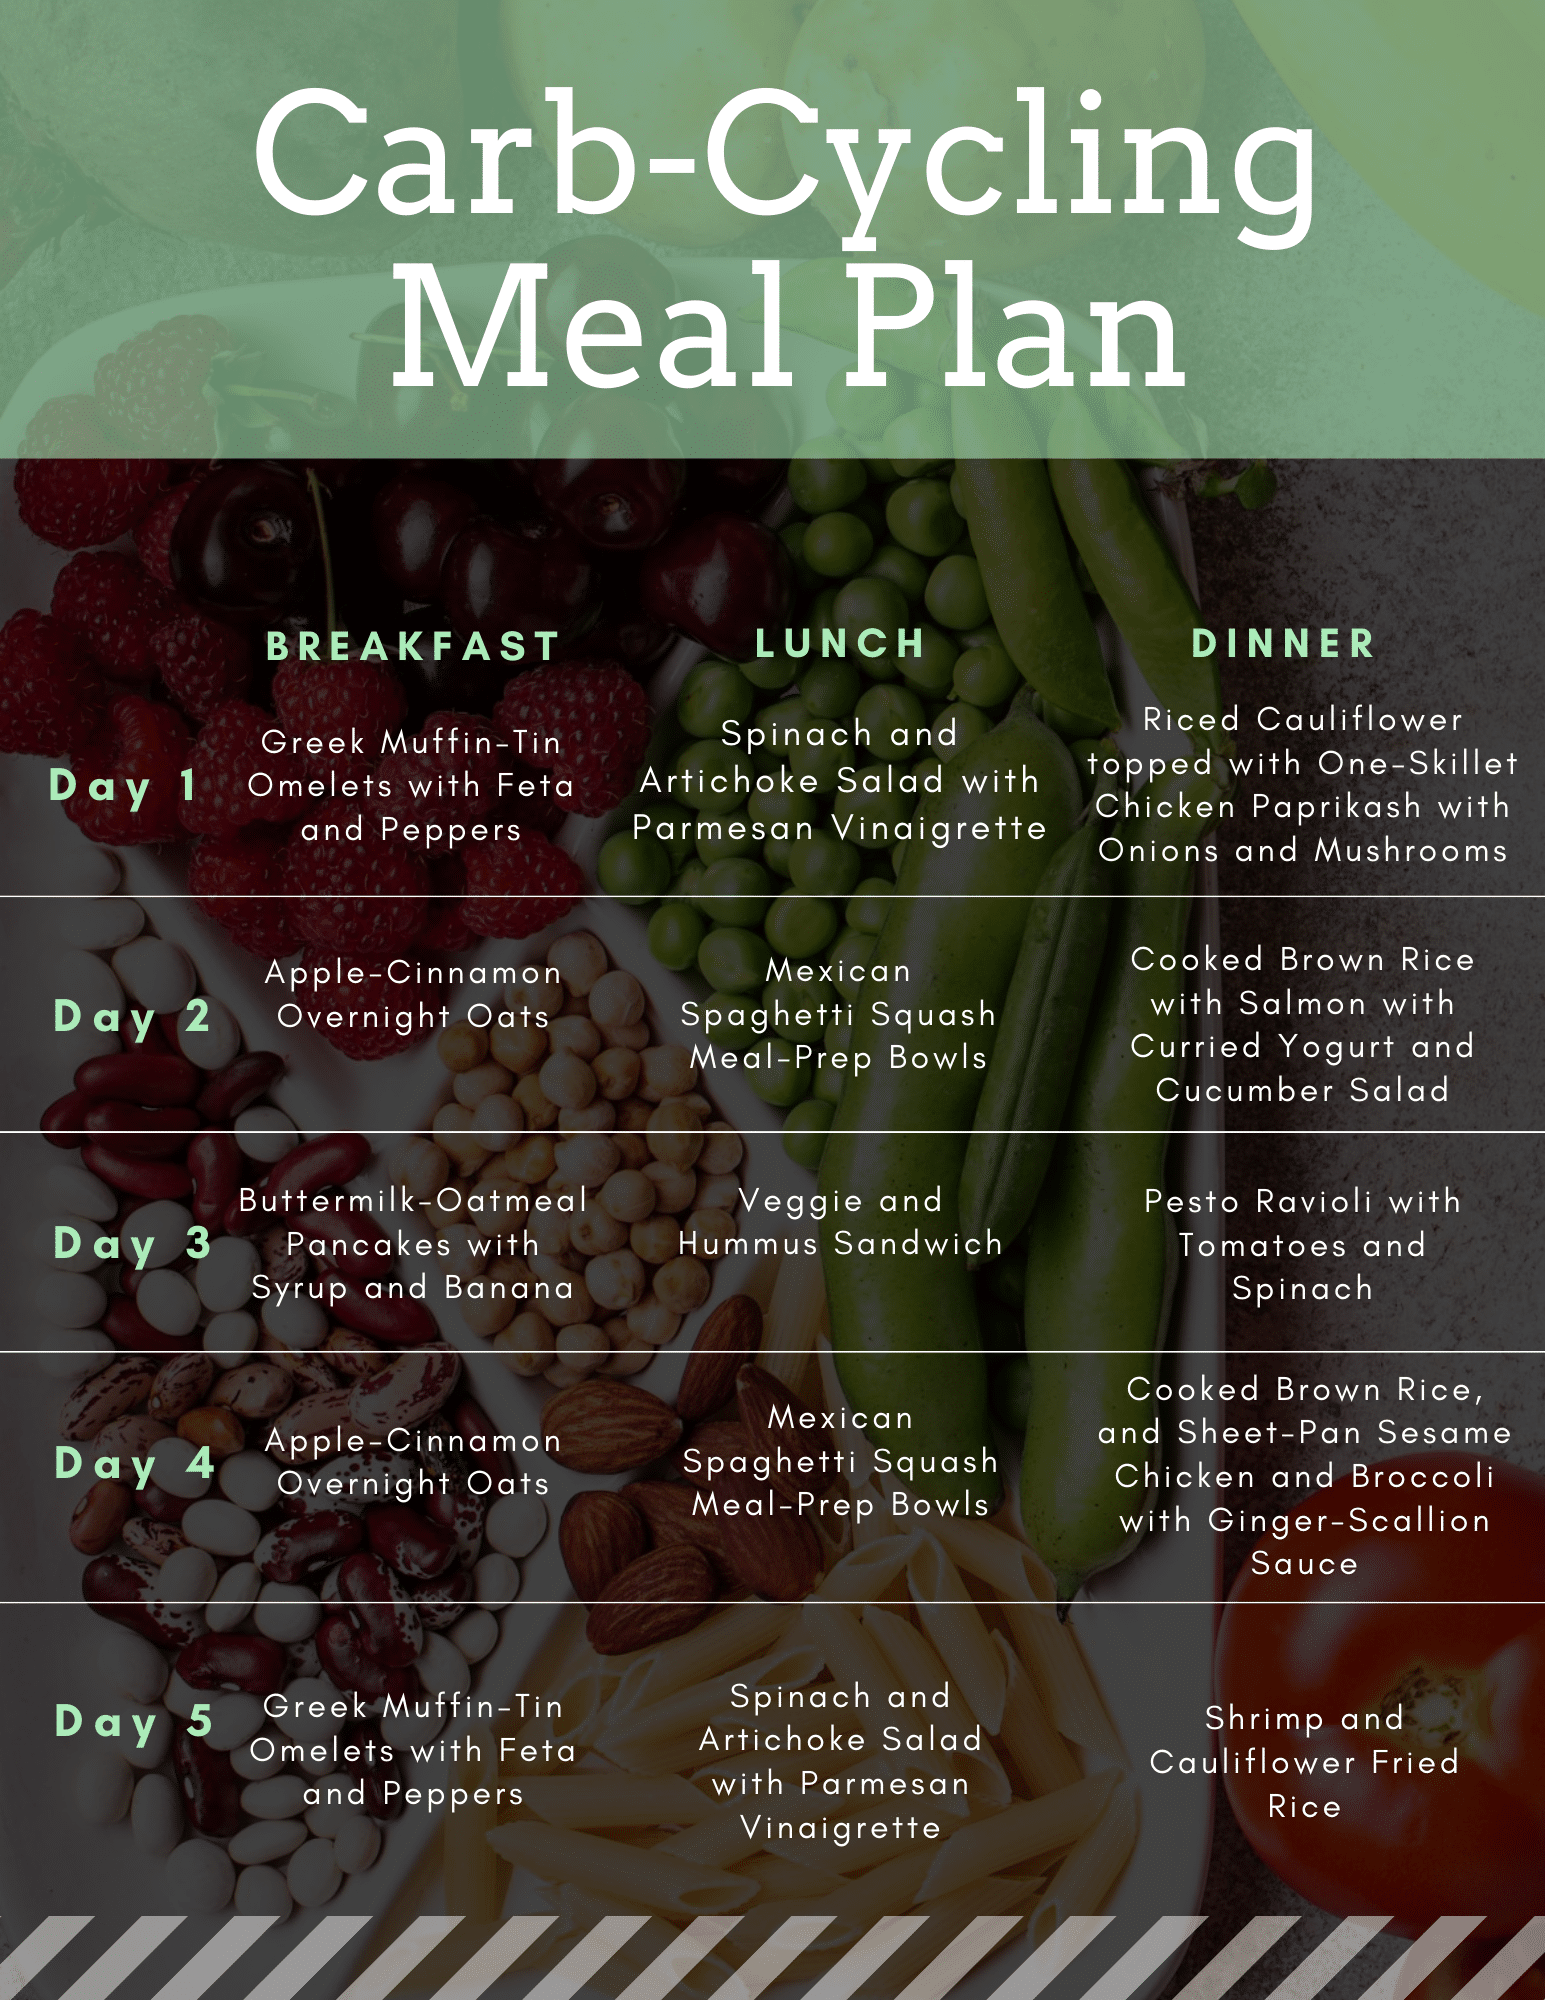 Carb-Cycling Meal Plan